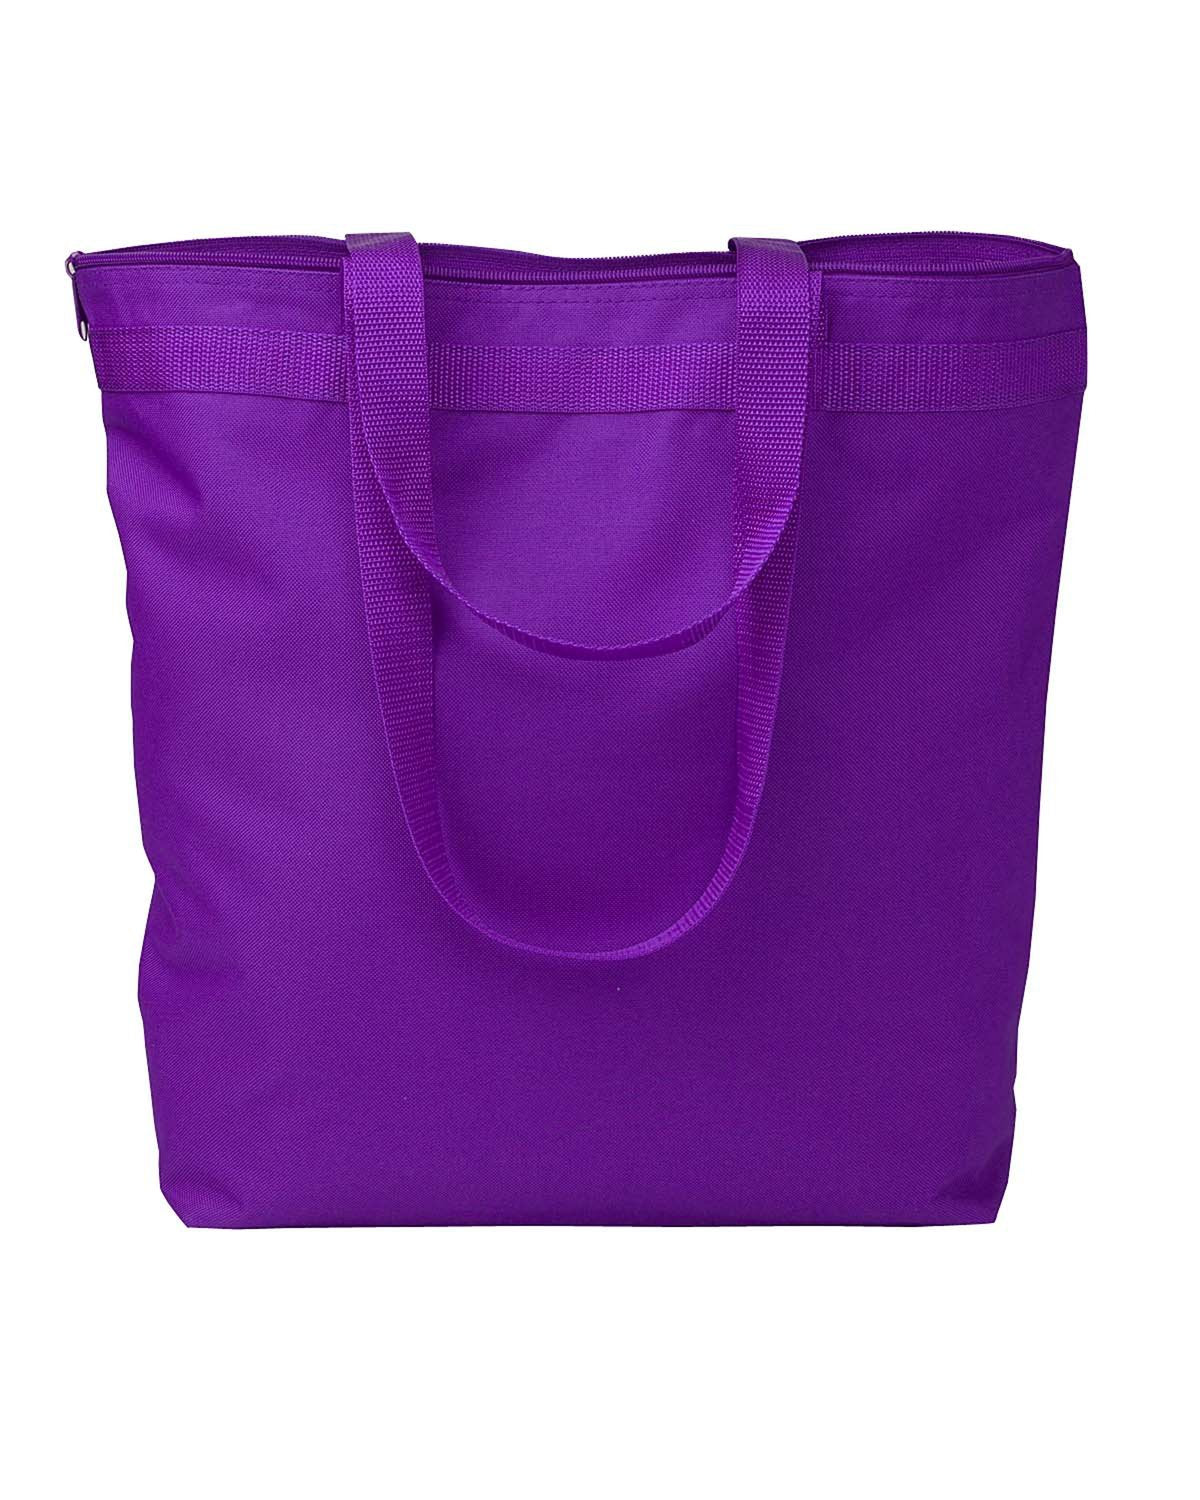 Bags and Accessories PURPLE OS Liberty Bags